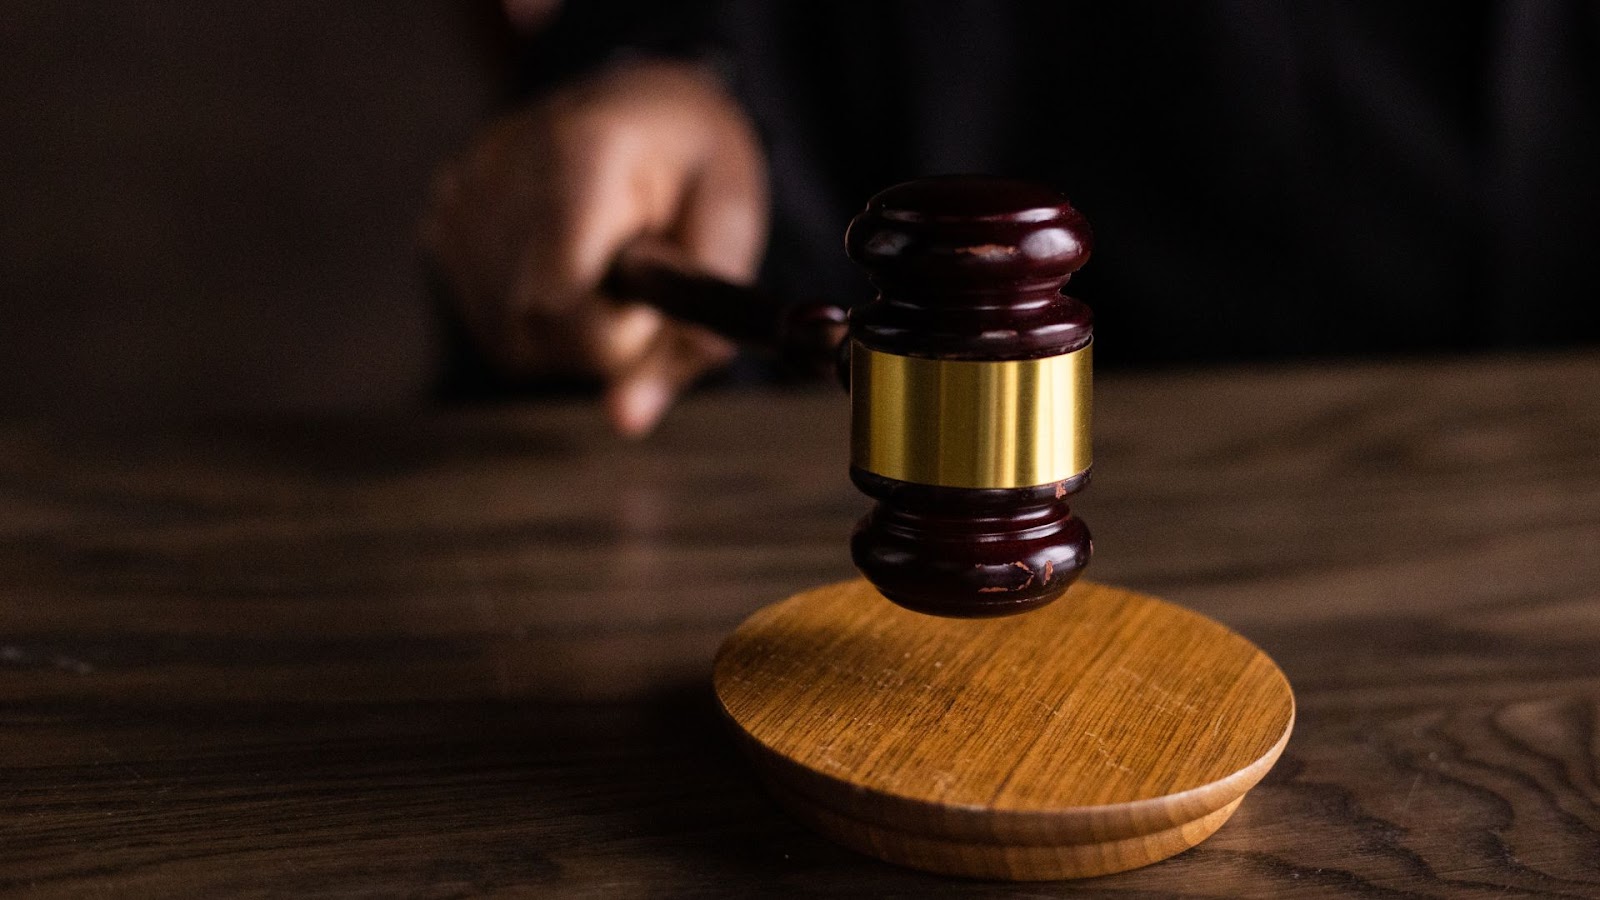 A judge's gavel in focus on a wooden block with the hand of a person in a dark suit blurred in the background, symbolizing a court's authority in legal matters.